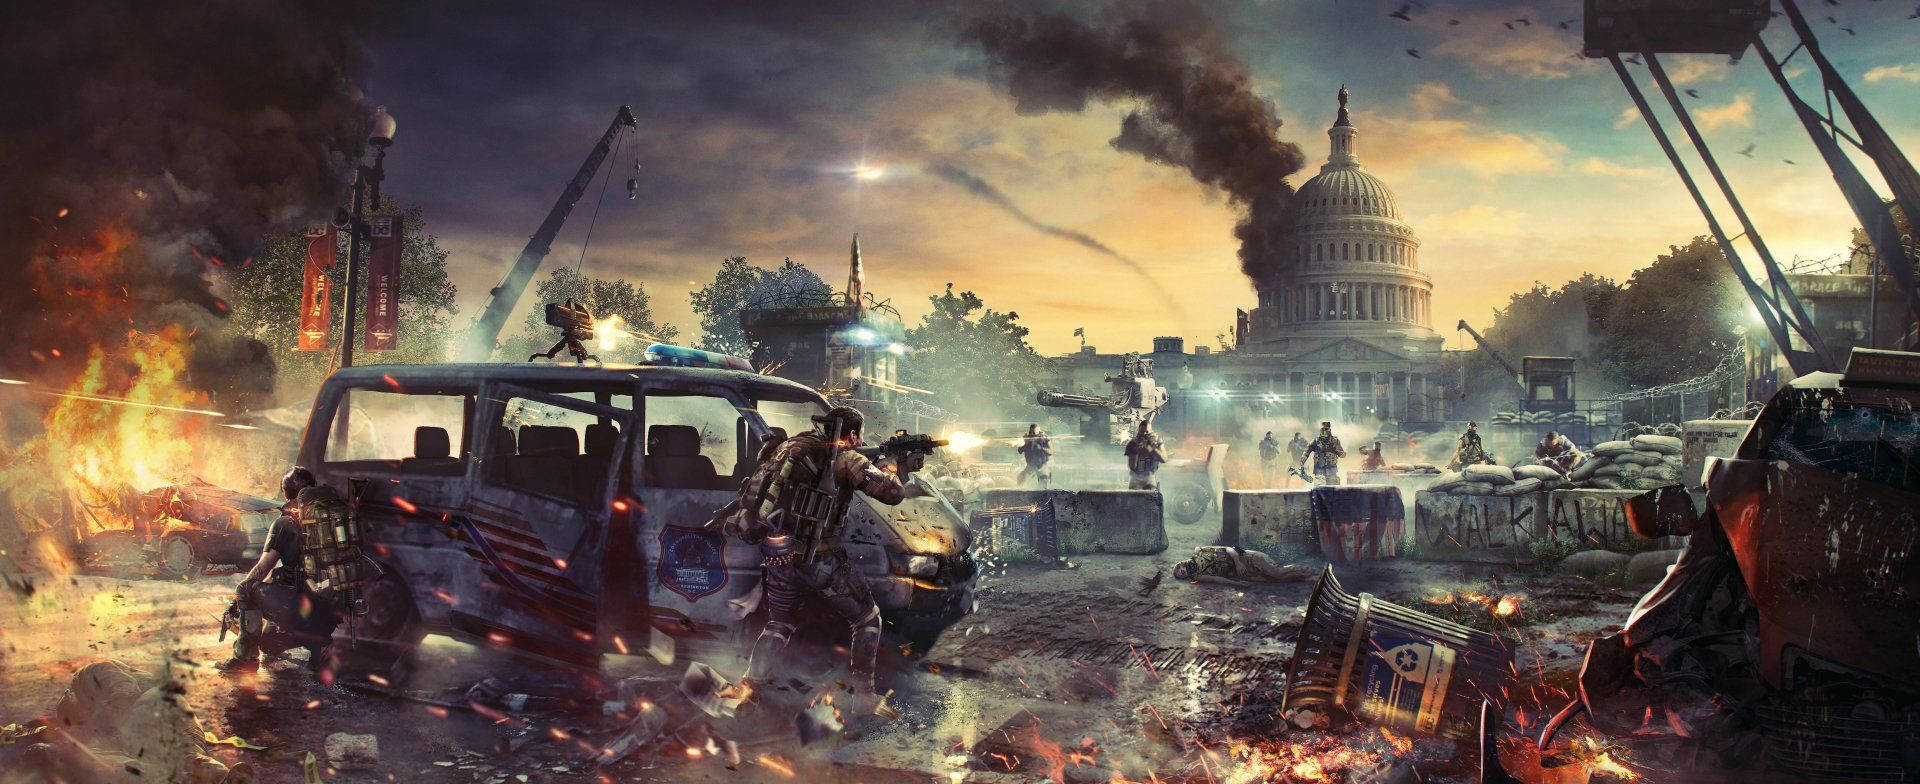 The Division 2 Gunfight In City Background